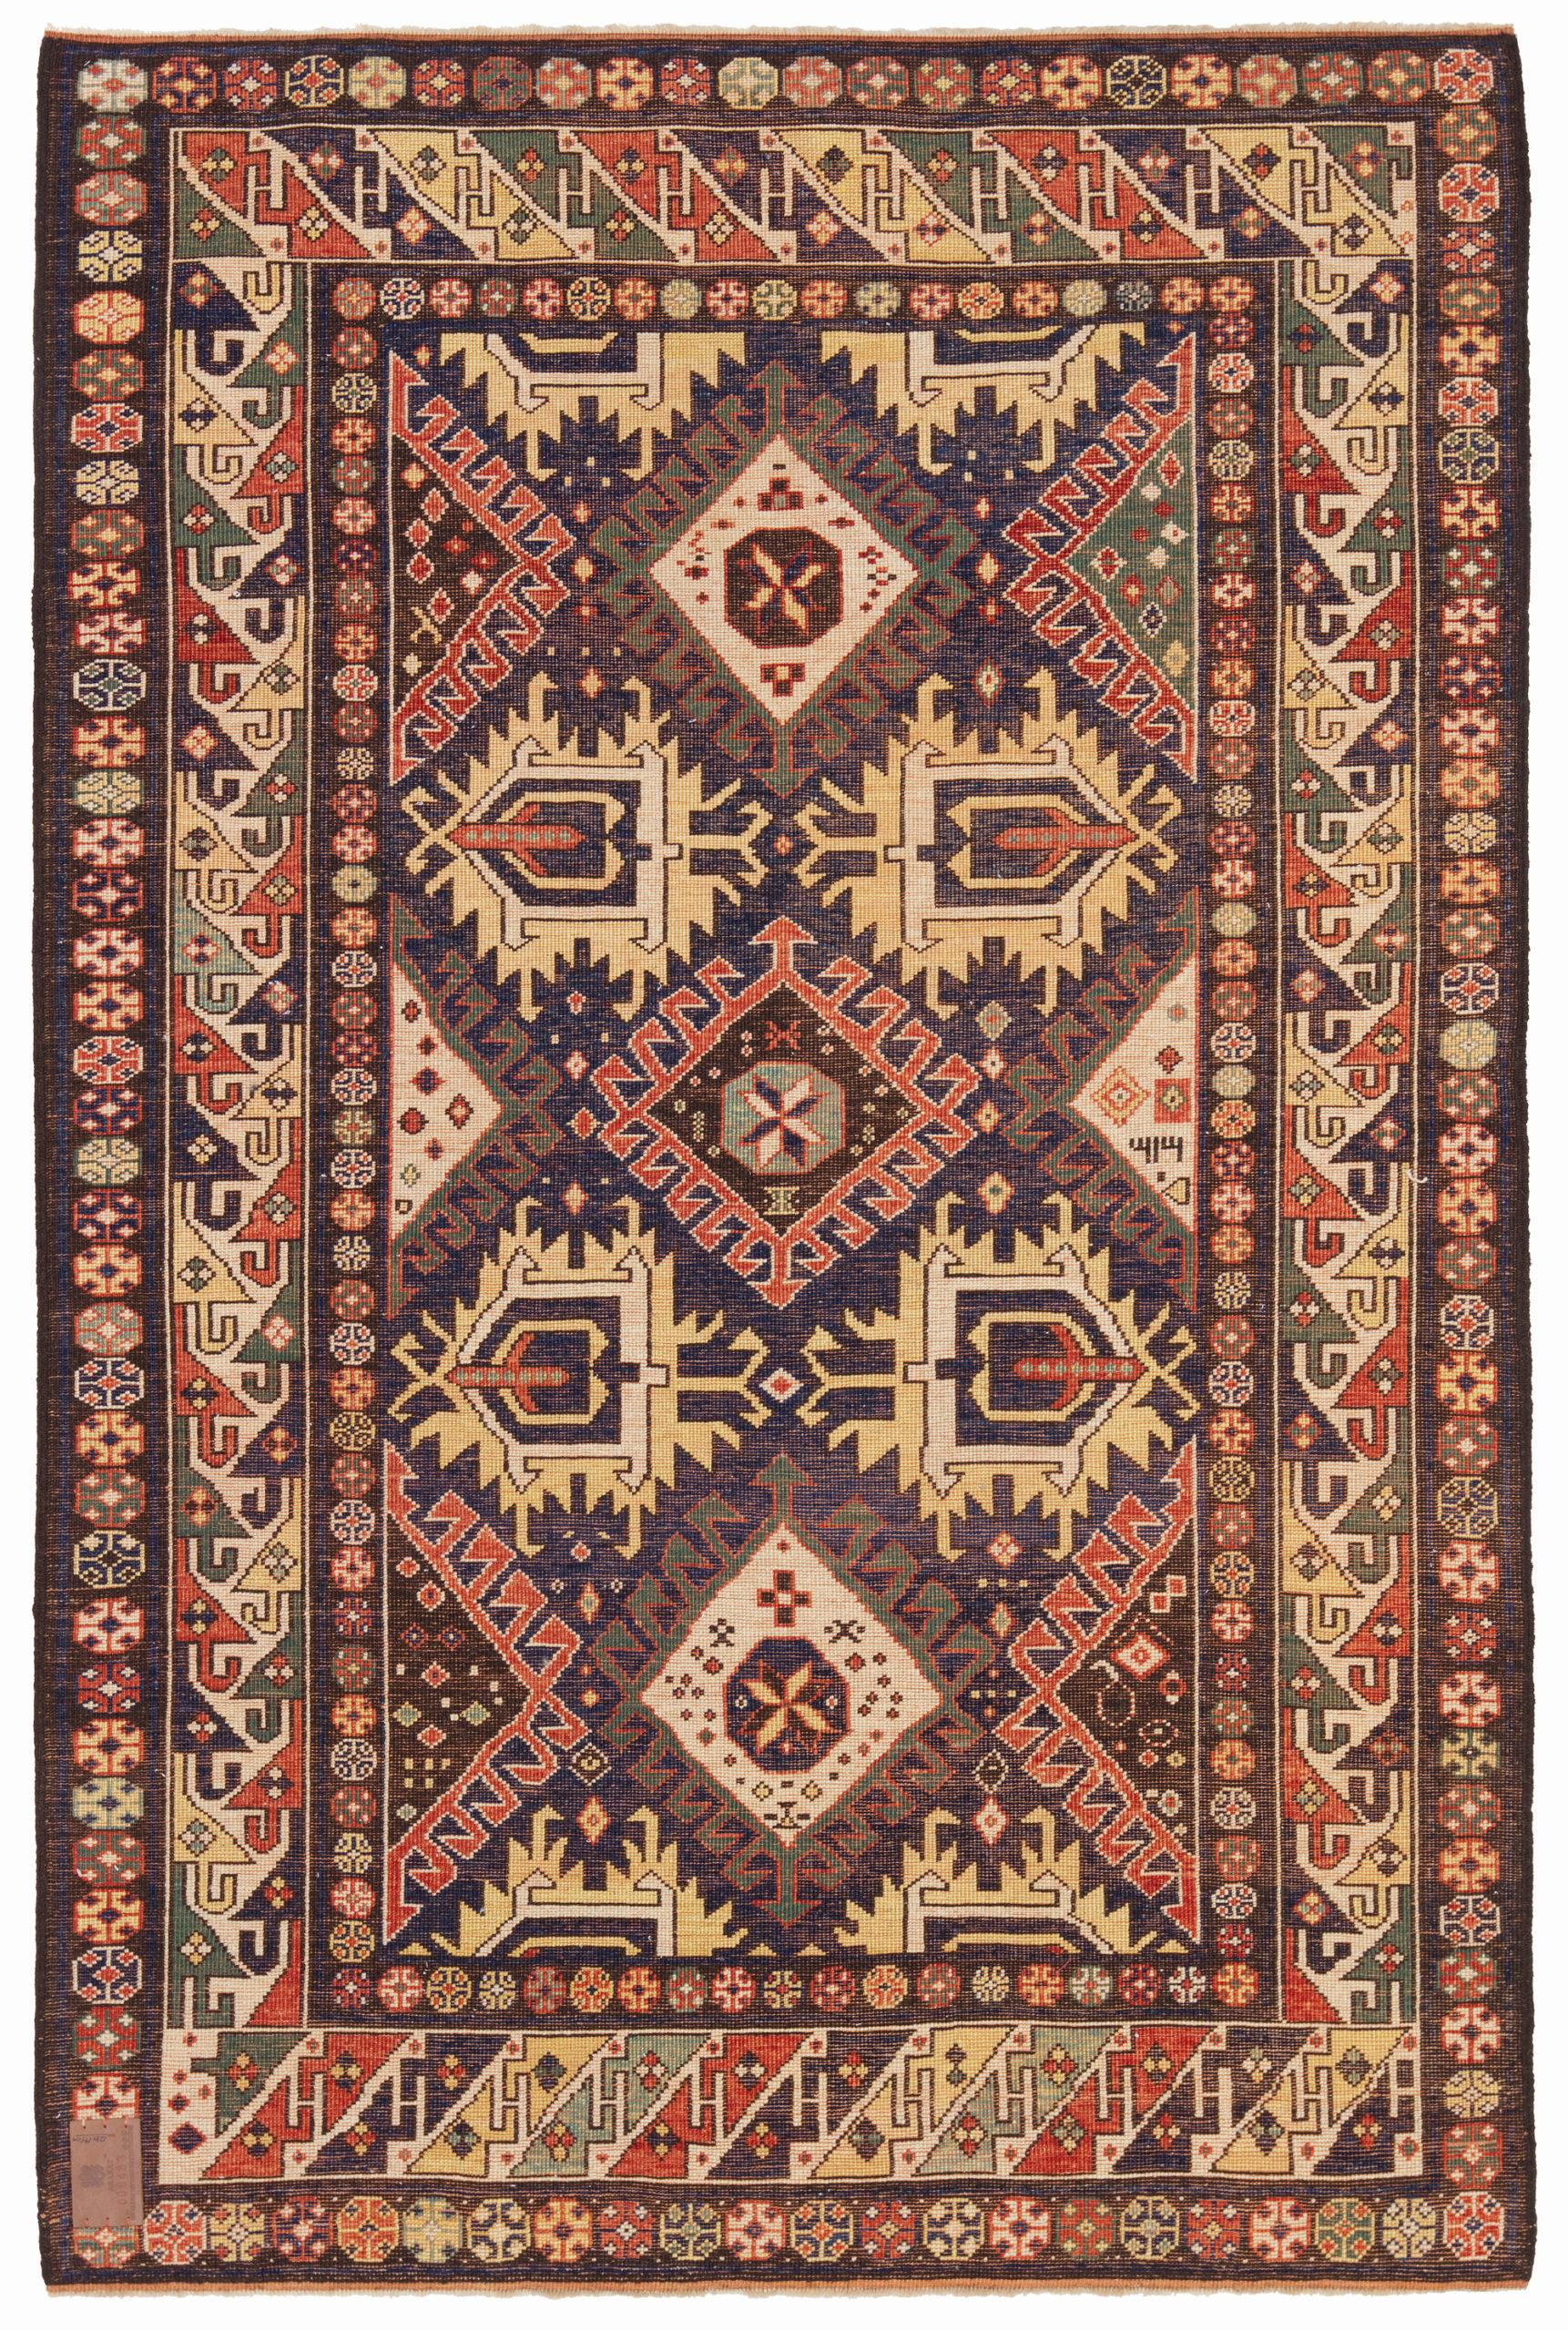 This is a Derbend Kazak rug also known as Daghestan rug, designed late 19th century, is a type of handwoven rug that originate from the Caucasus region, specifically from the town of Derbend (also spelled as Derbent) in modern-day Dagestan, Russia.